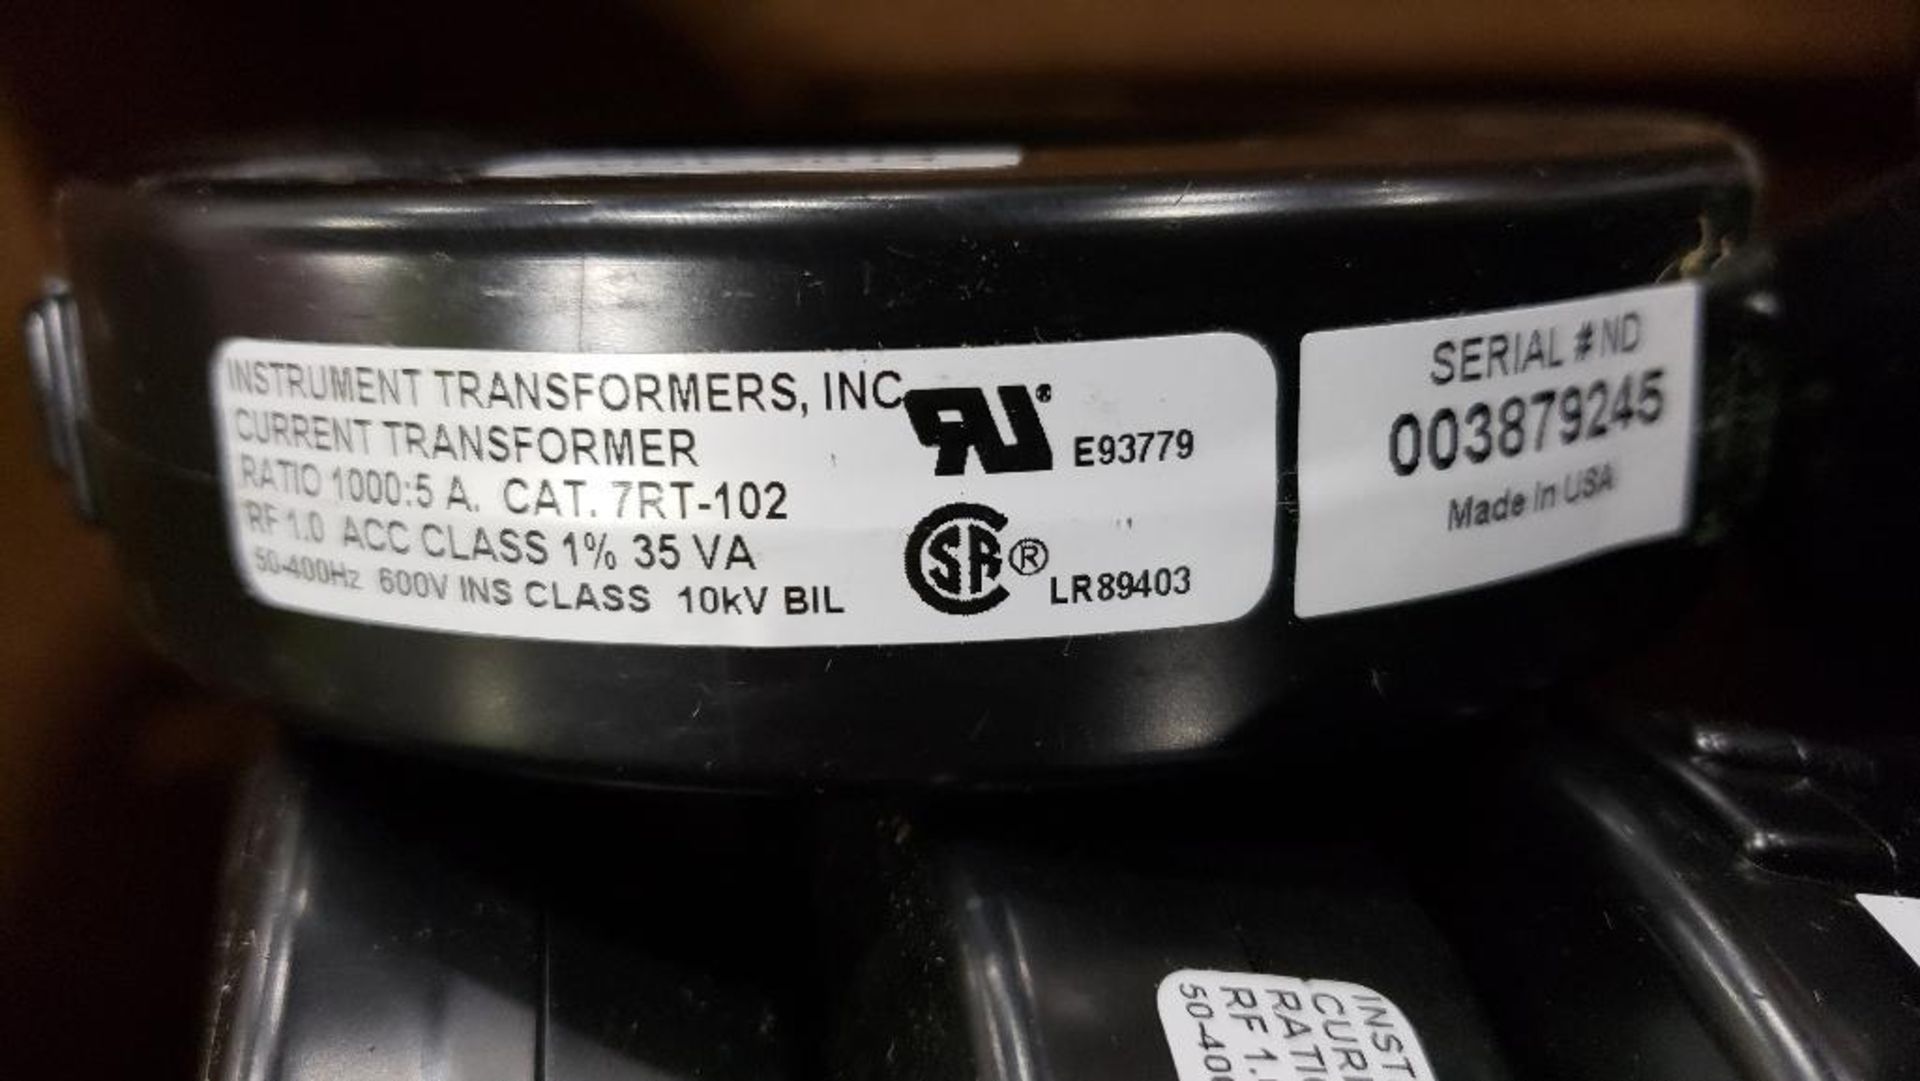 Qty 19 - Instrument Transformers current transformer. Catalog 7RT-102. New without box. - Image 3 of 4